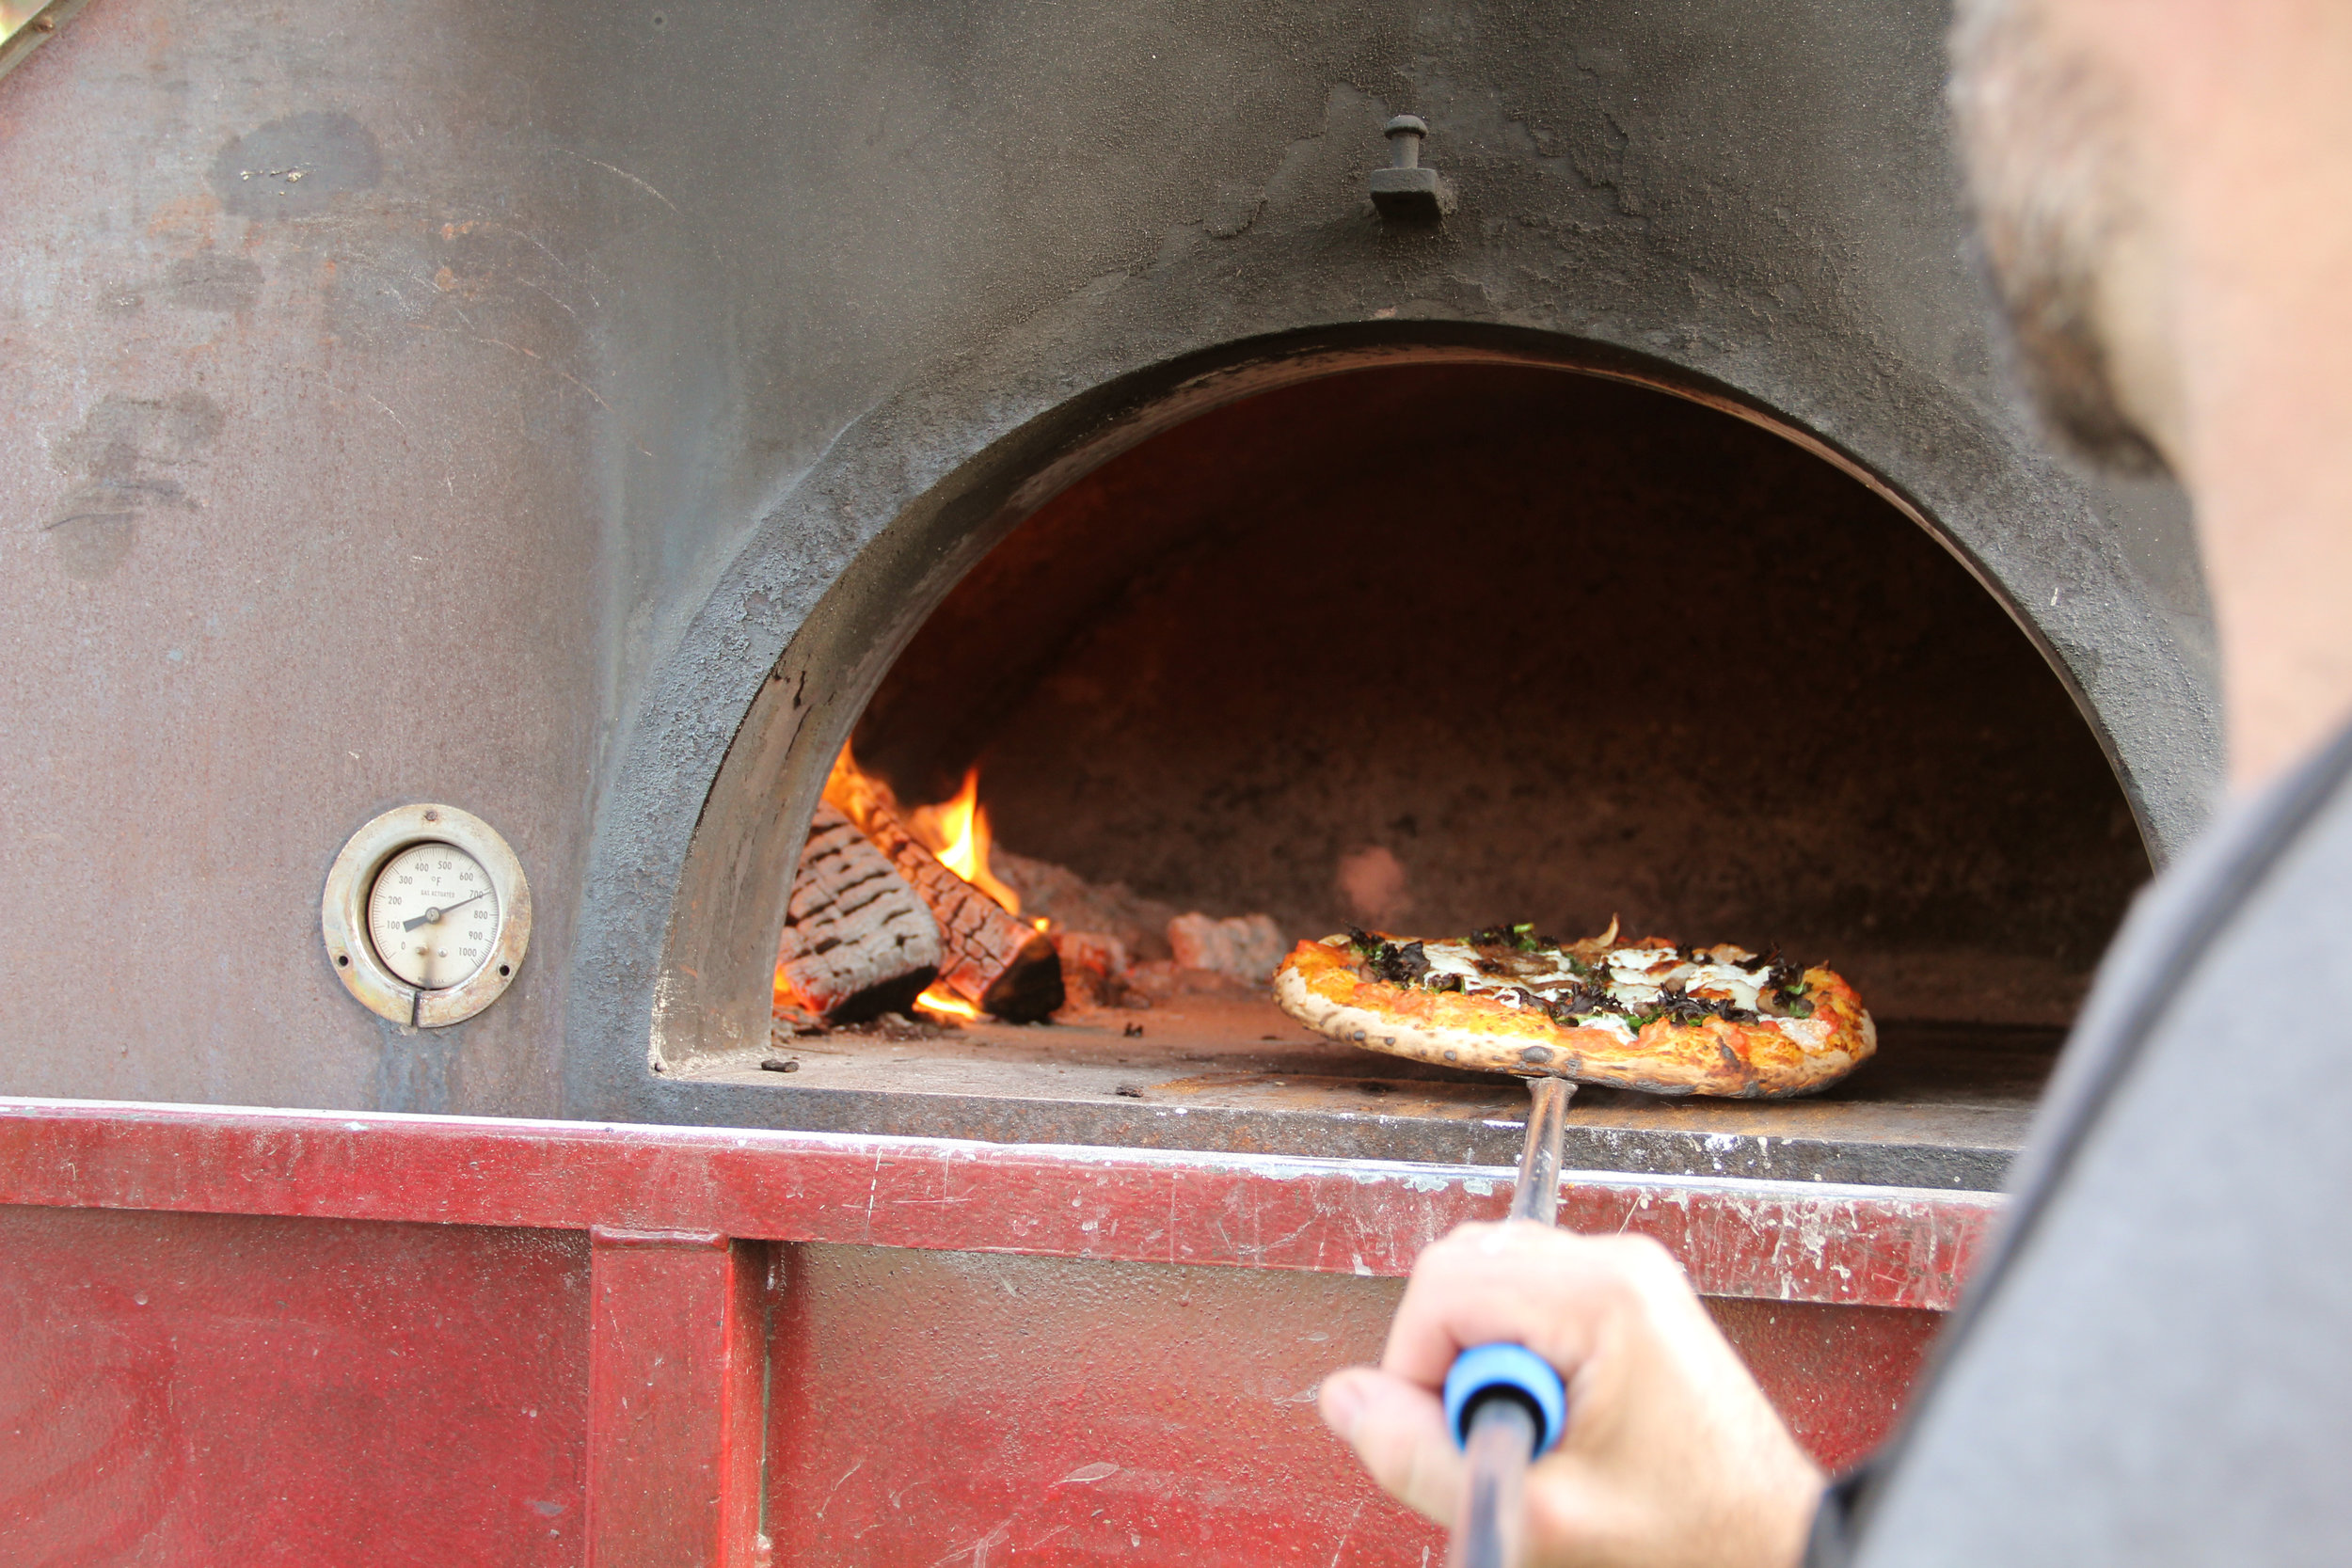 Doug Cullen Wood Fired Pizza Truck Catering Events Weddings Hudson Valley Westchester Hastings on Hudson NYC Caterer.jpg